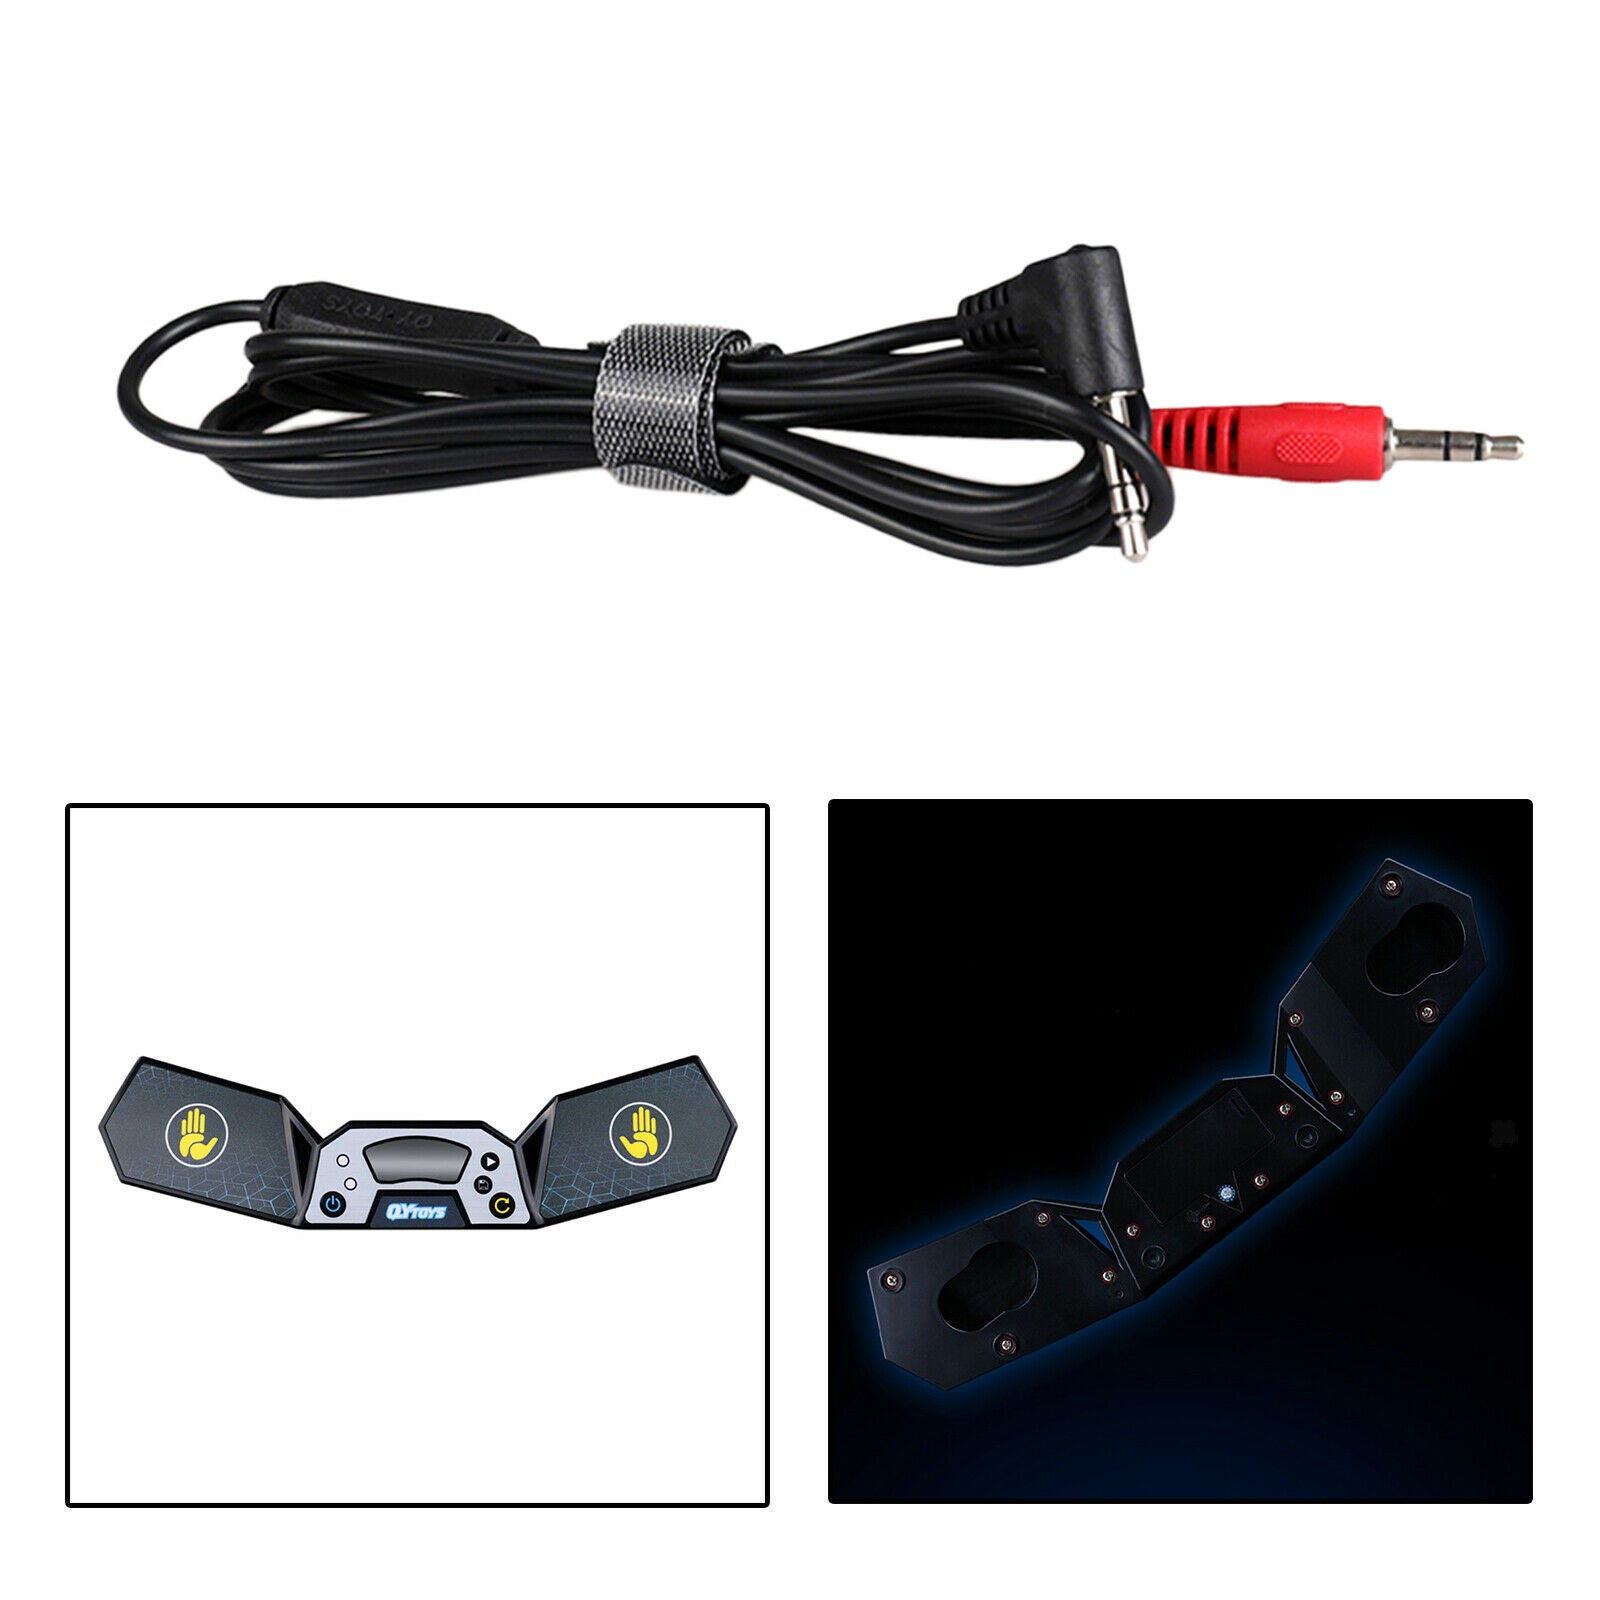 1.5m Data Tranfer Cable Cord for G4 Pro Professional   Timer Clock Easy Use